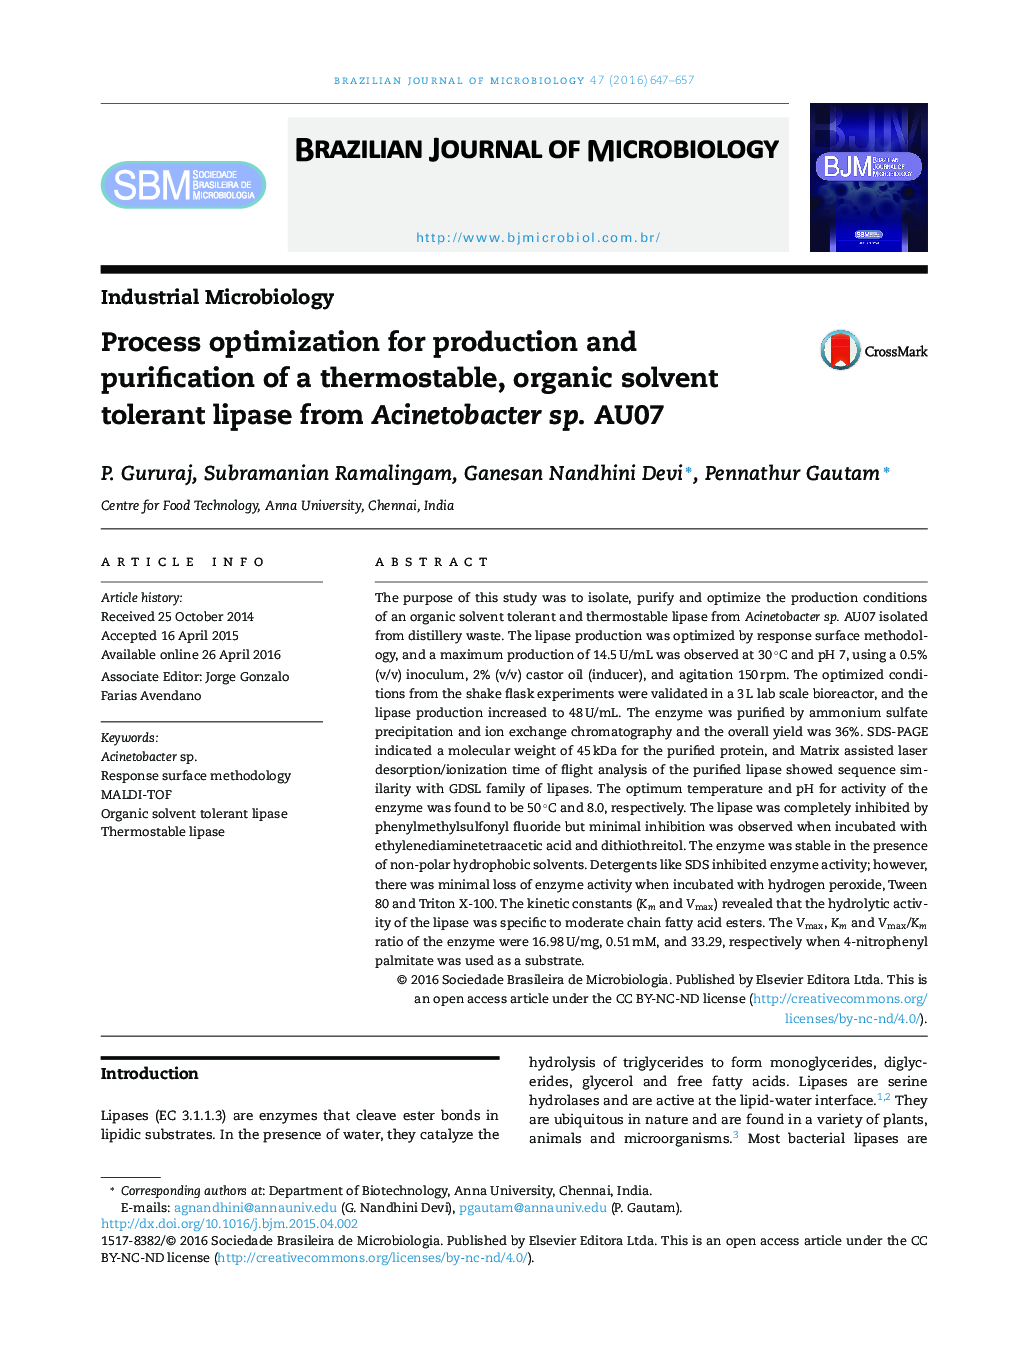 Process optimization for production and purification of a thermostable, organic solvent tolerant lipase from Acinetobacter sp. AU07